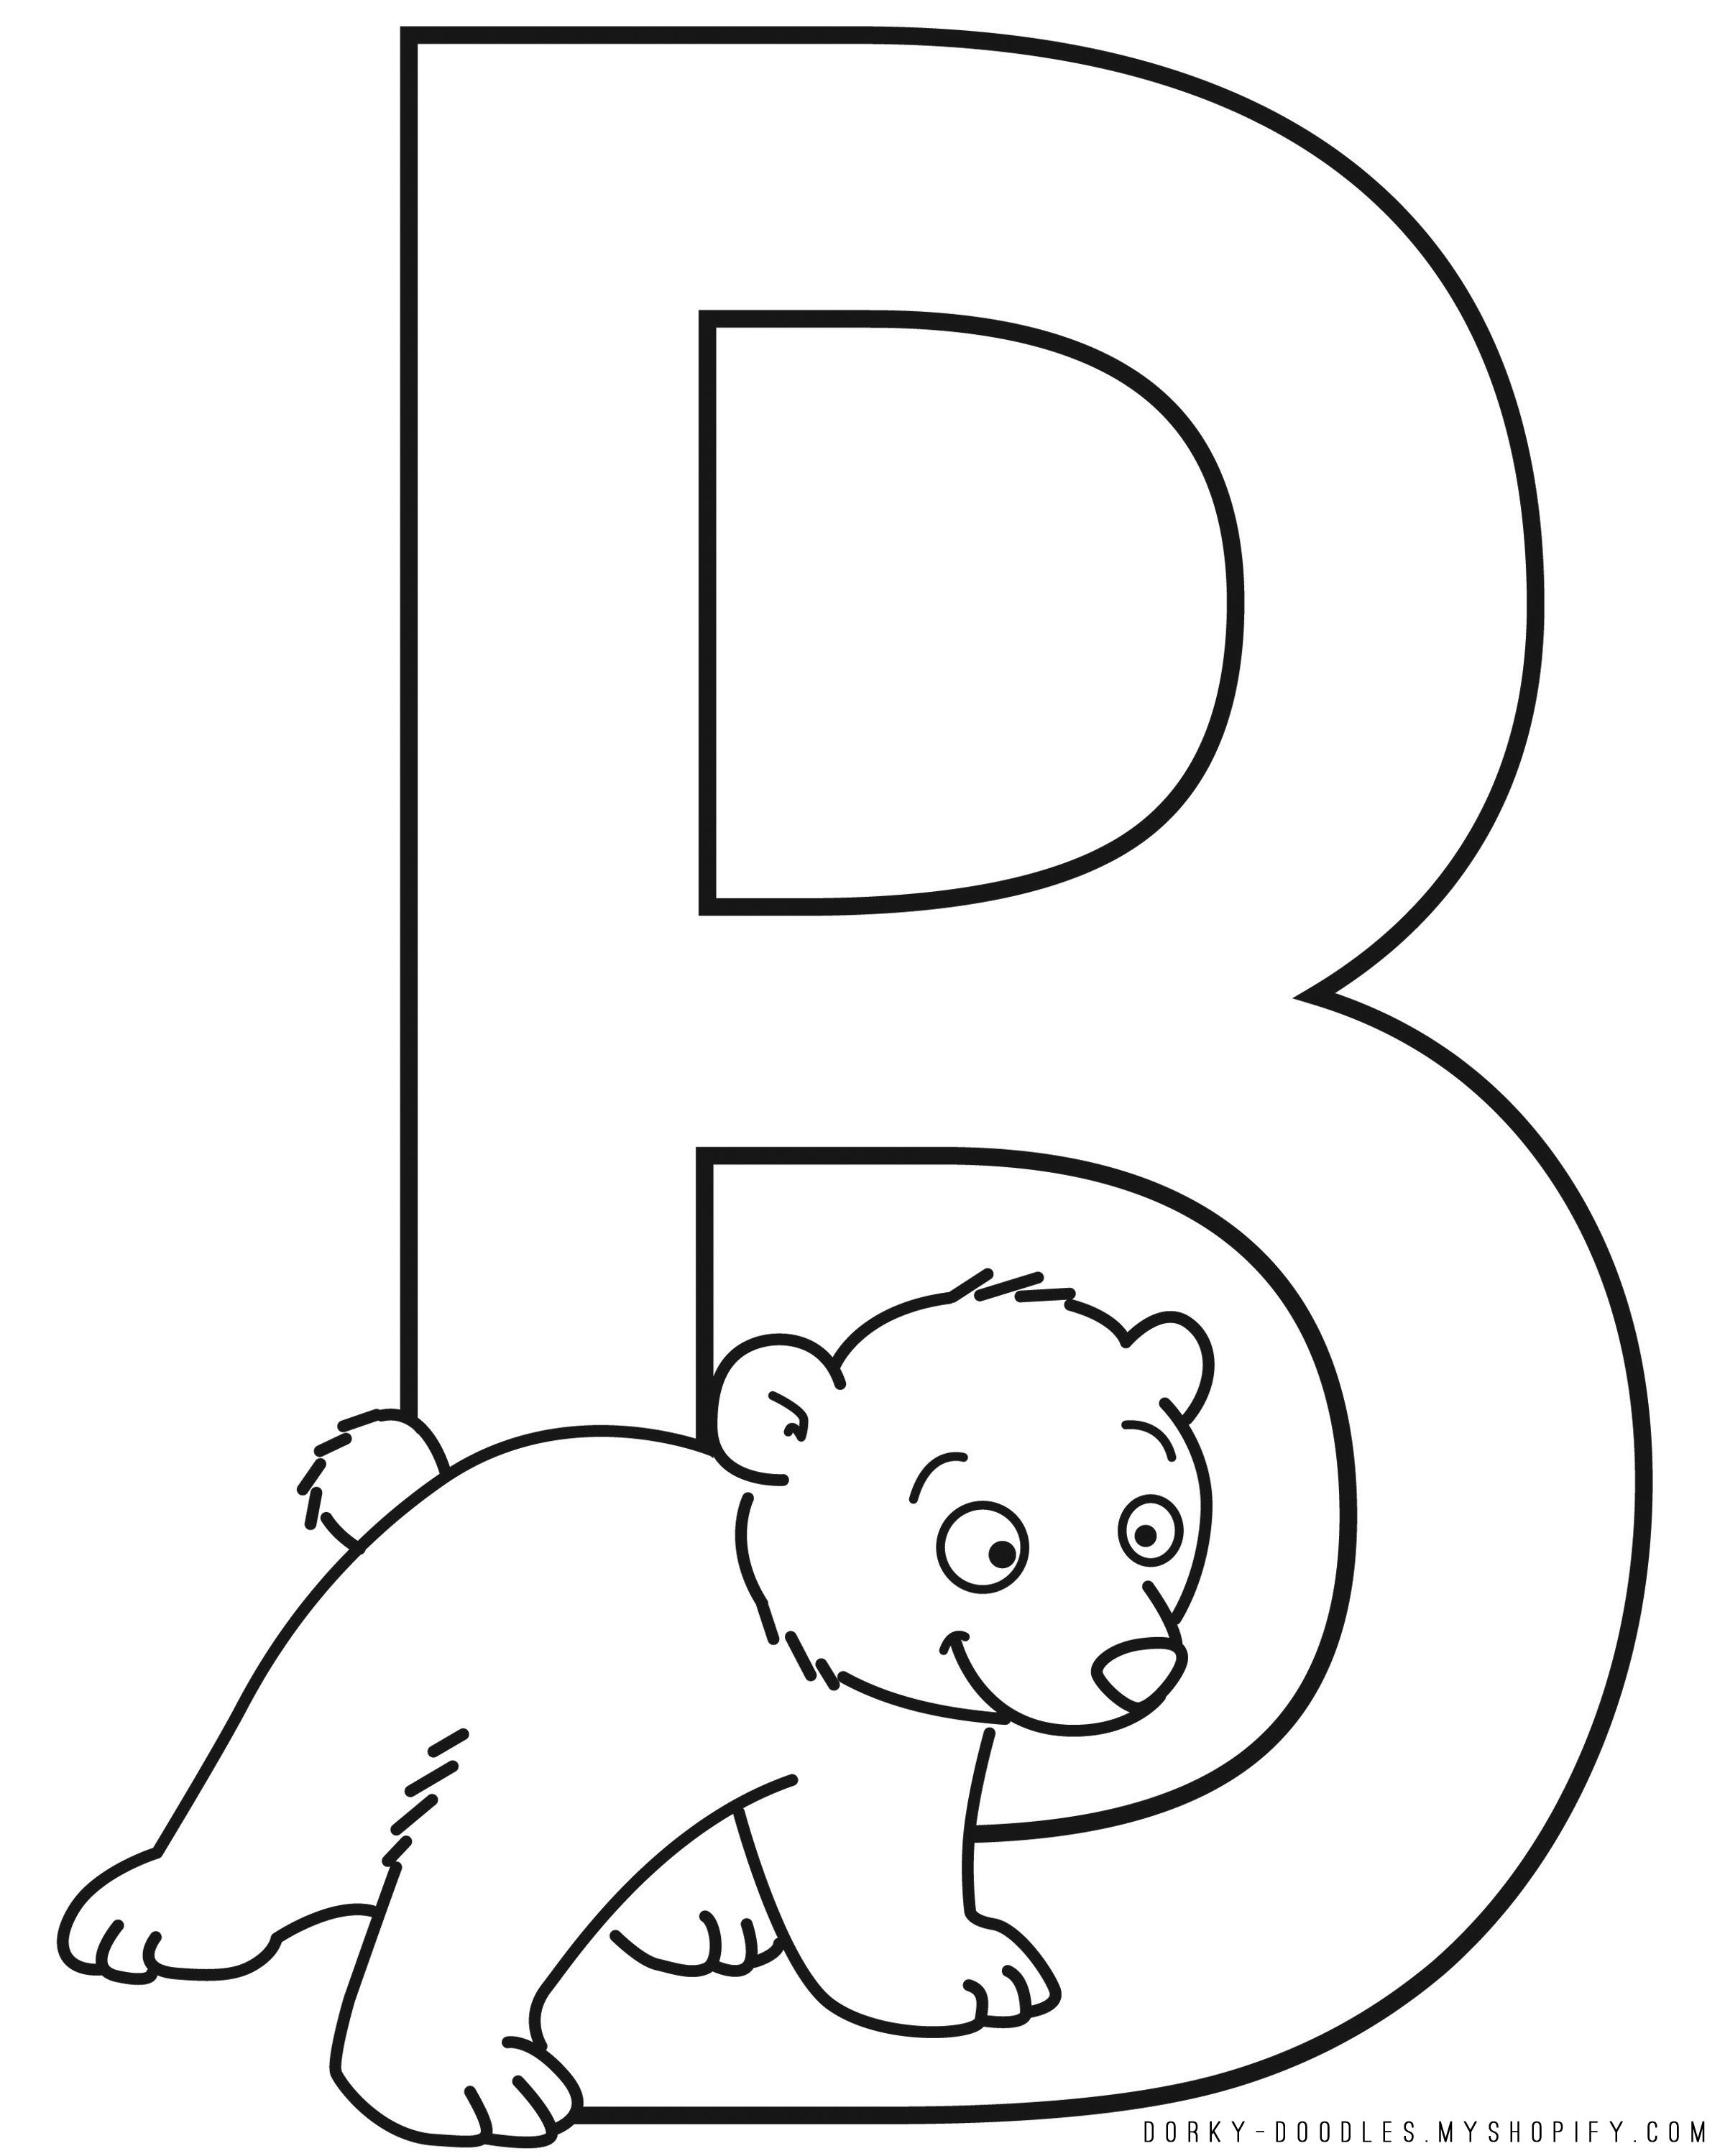 Worksheets For The Letter B Google Search Teaching Printable Letter B 